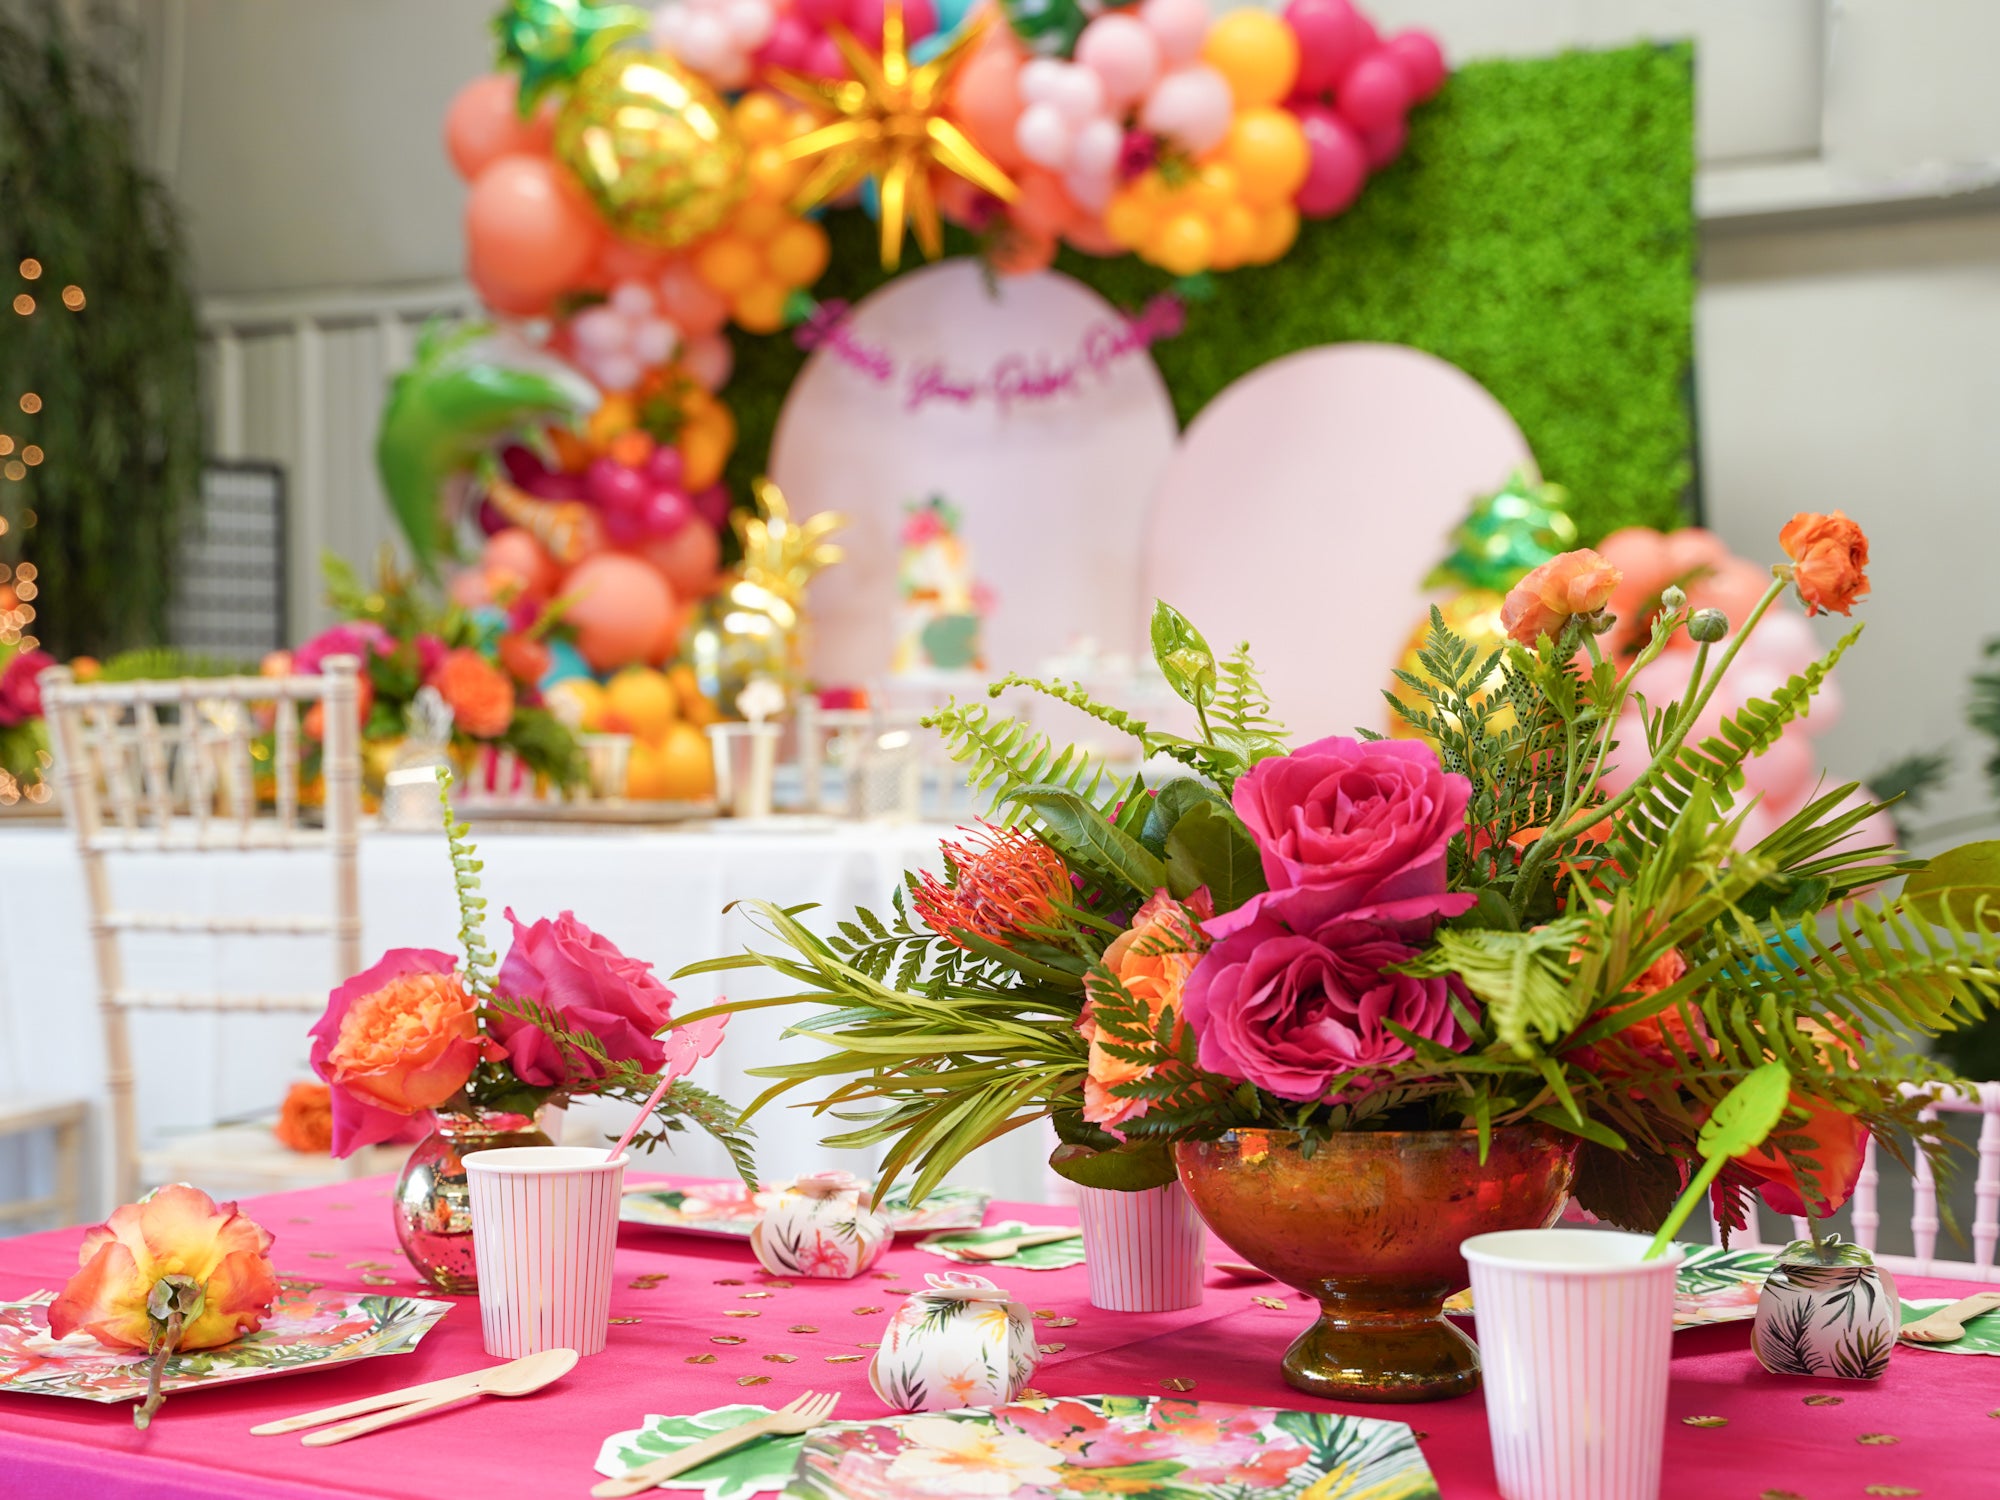 Tropical Party Decorations for an Hawaiian Luau Party | The Party Darling